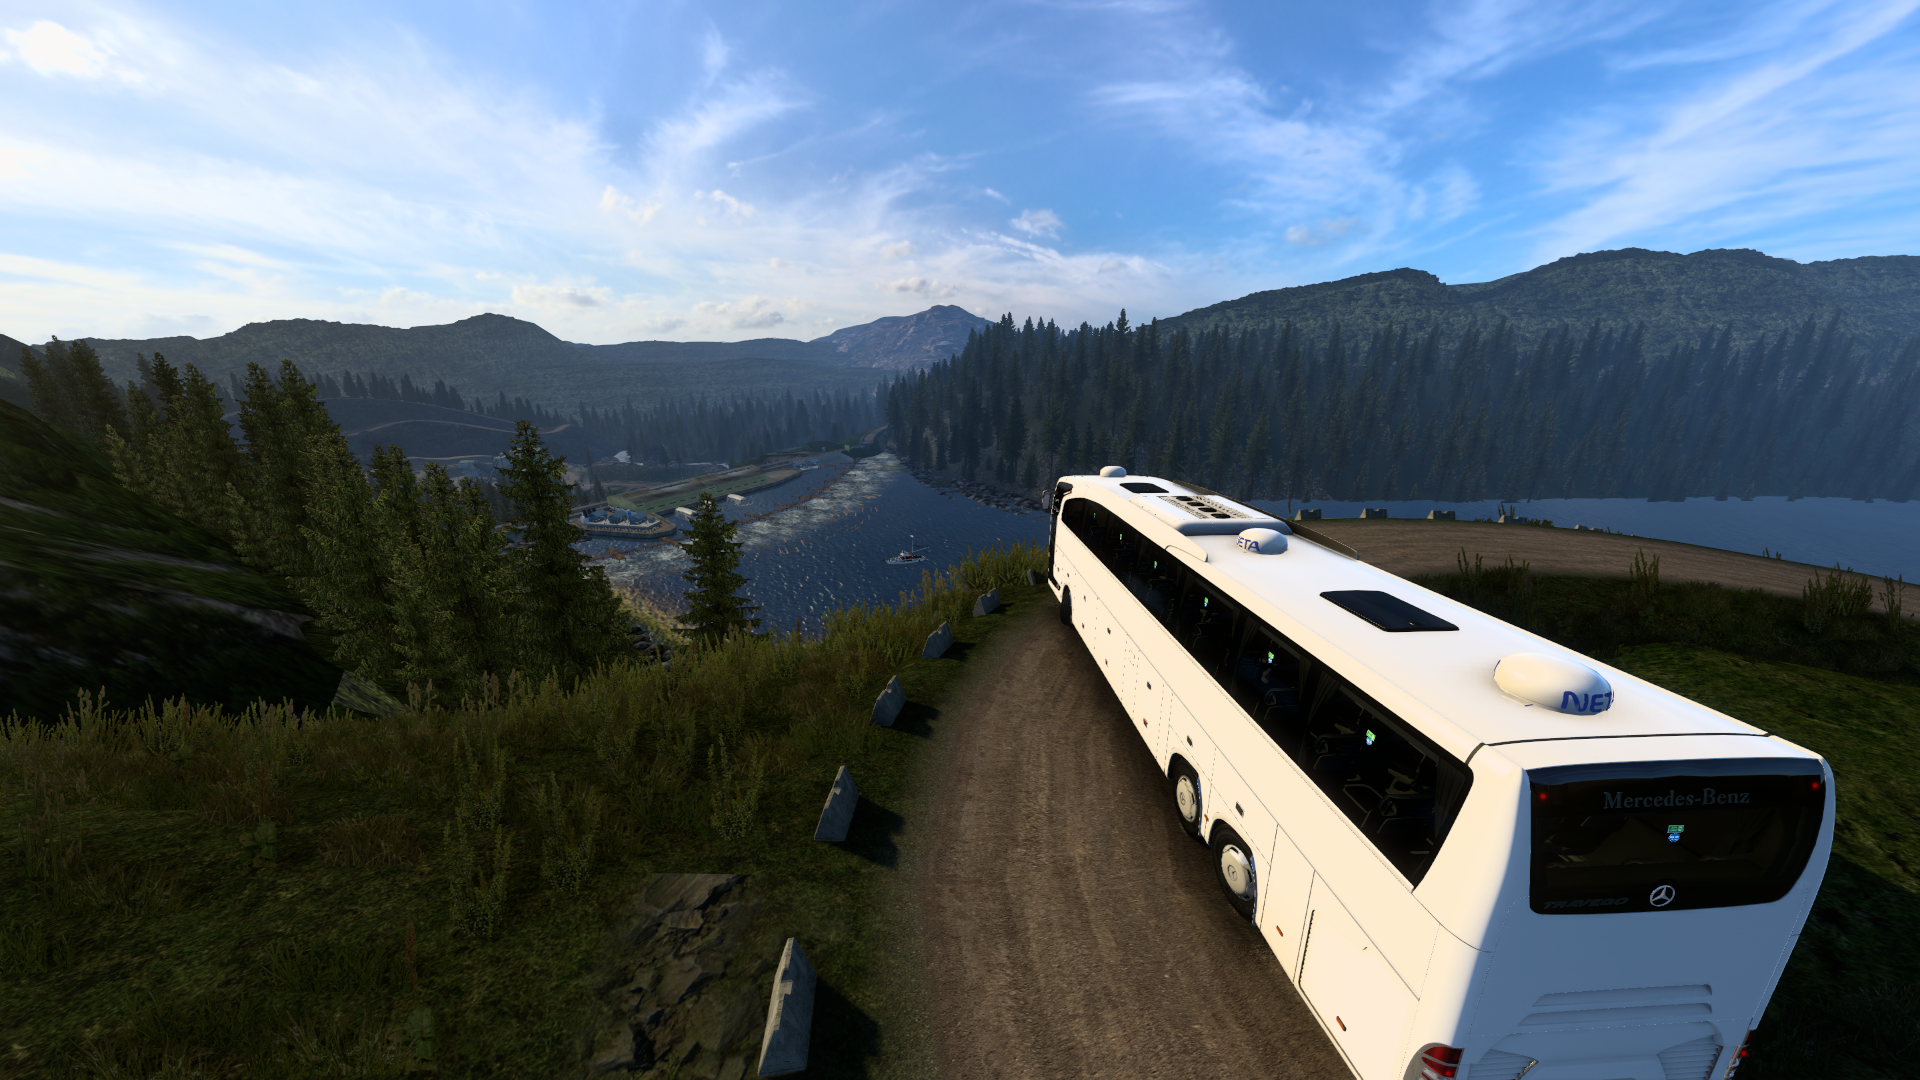 ets2_20220701_210740_00.png